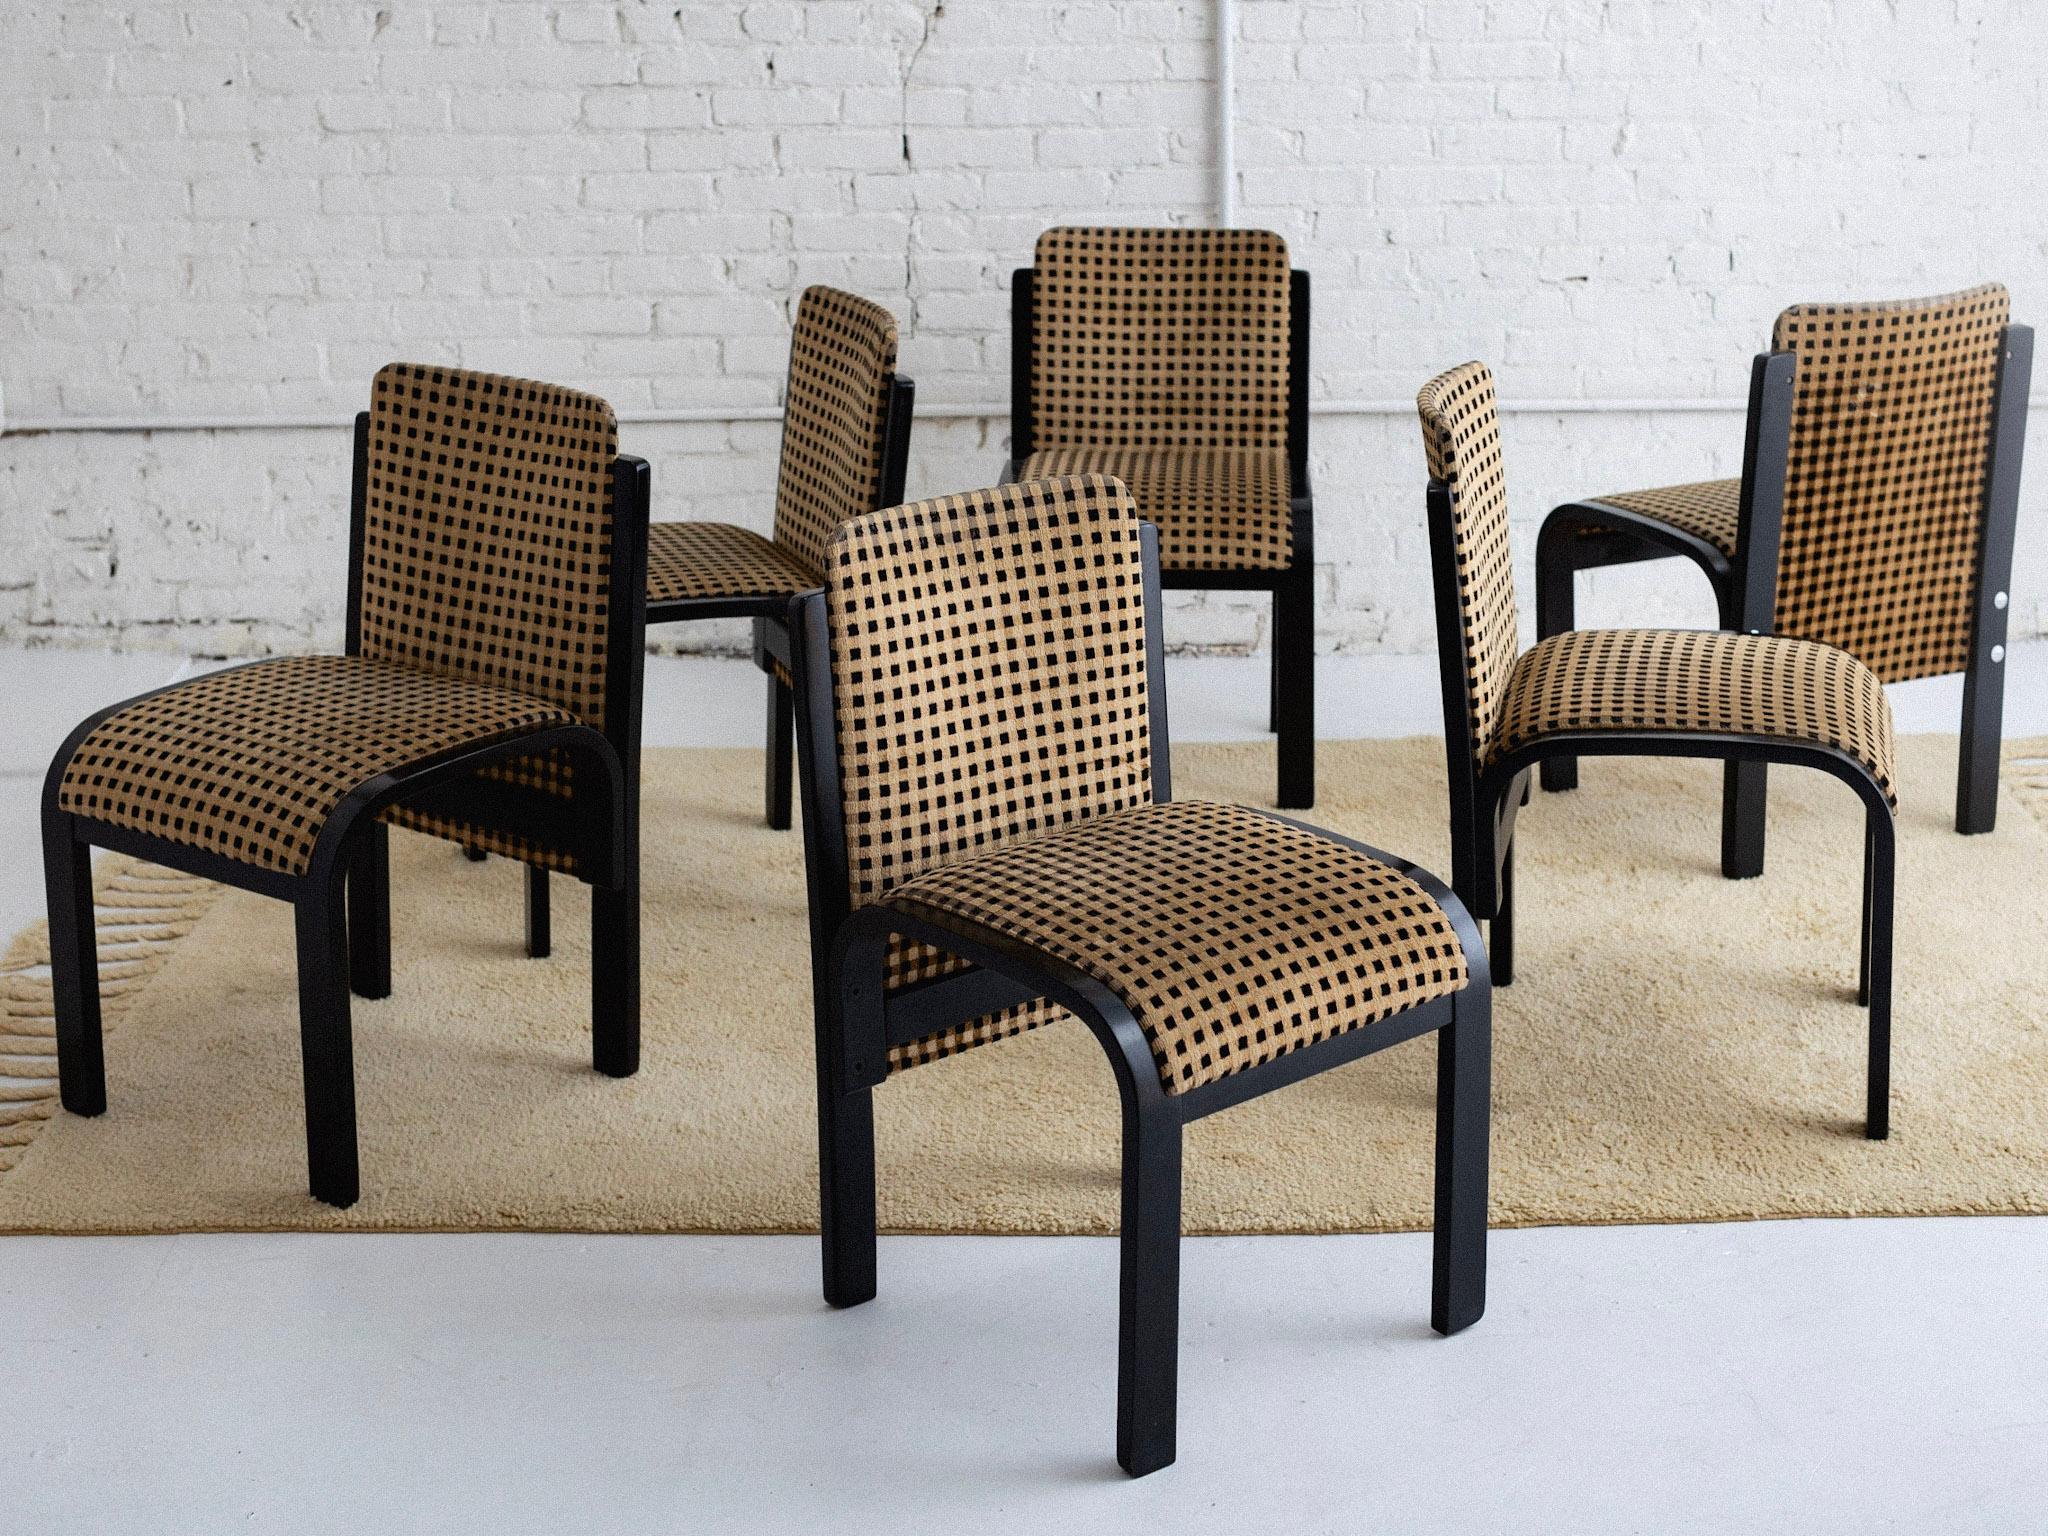 A set of six mid century Italian dining chairs. Black lacquered bentwood with chrome hardware. Original geometric patterned velvet. Reupholstery is recommended but not required. Sourced in Northern Italy.